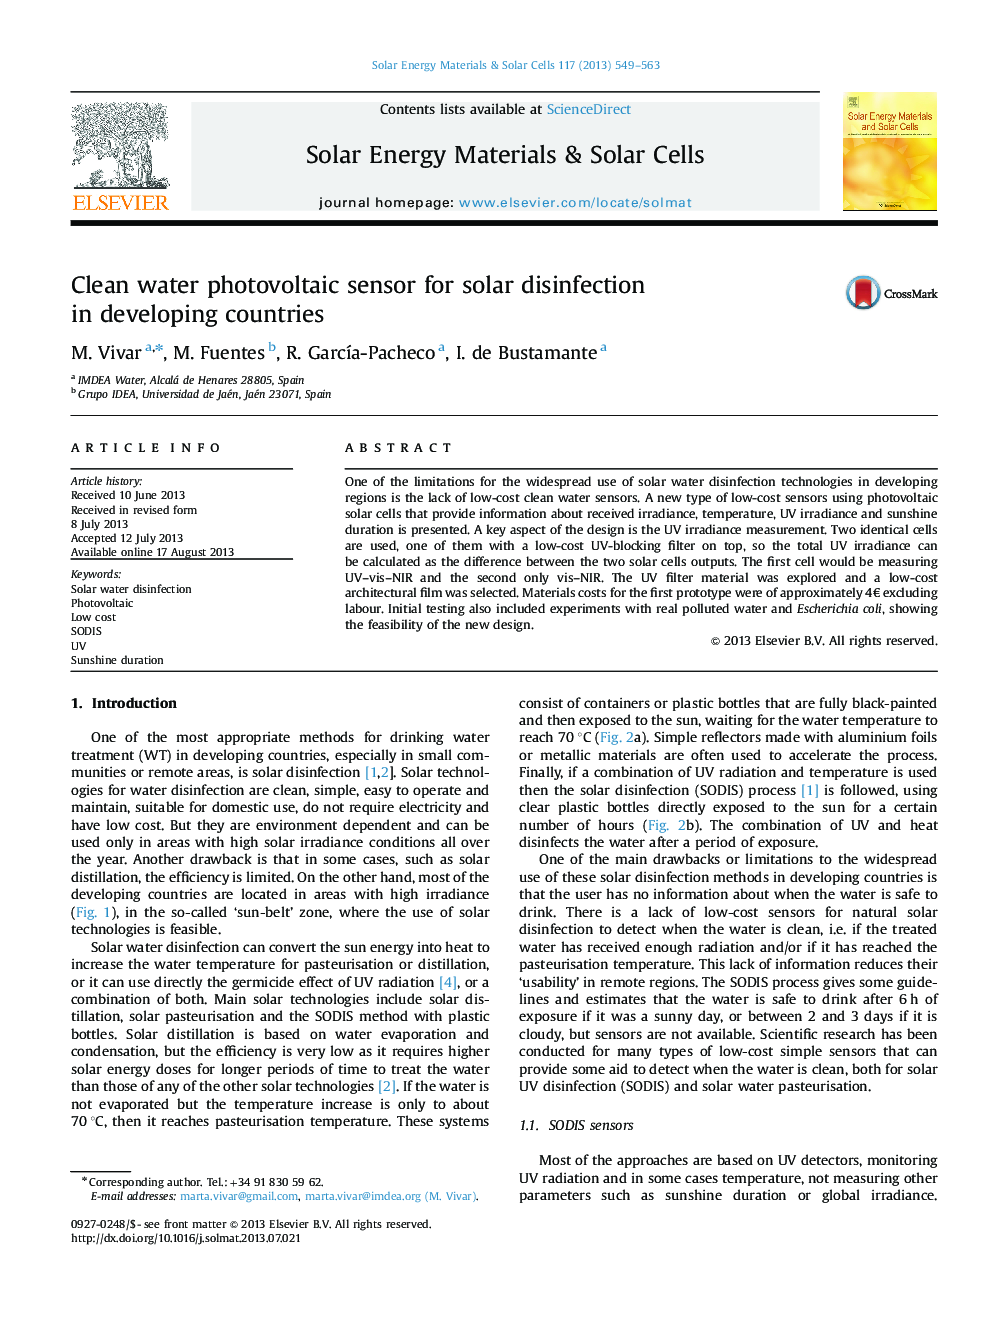 Clean water photovoltaic sensor for solar disinfection in developing countries